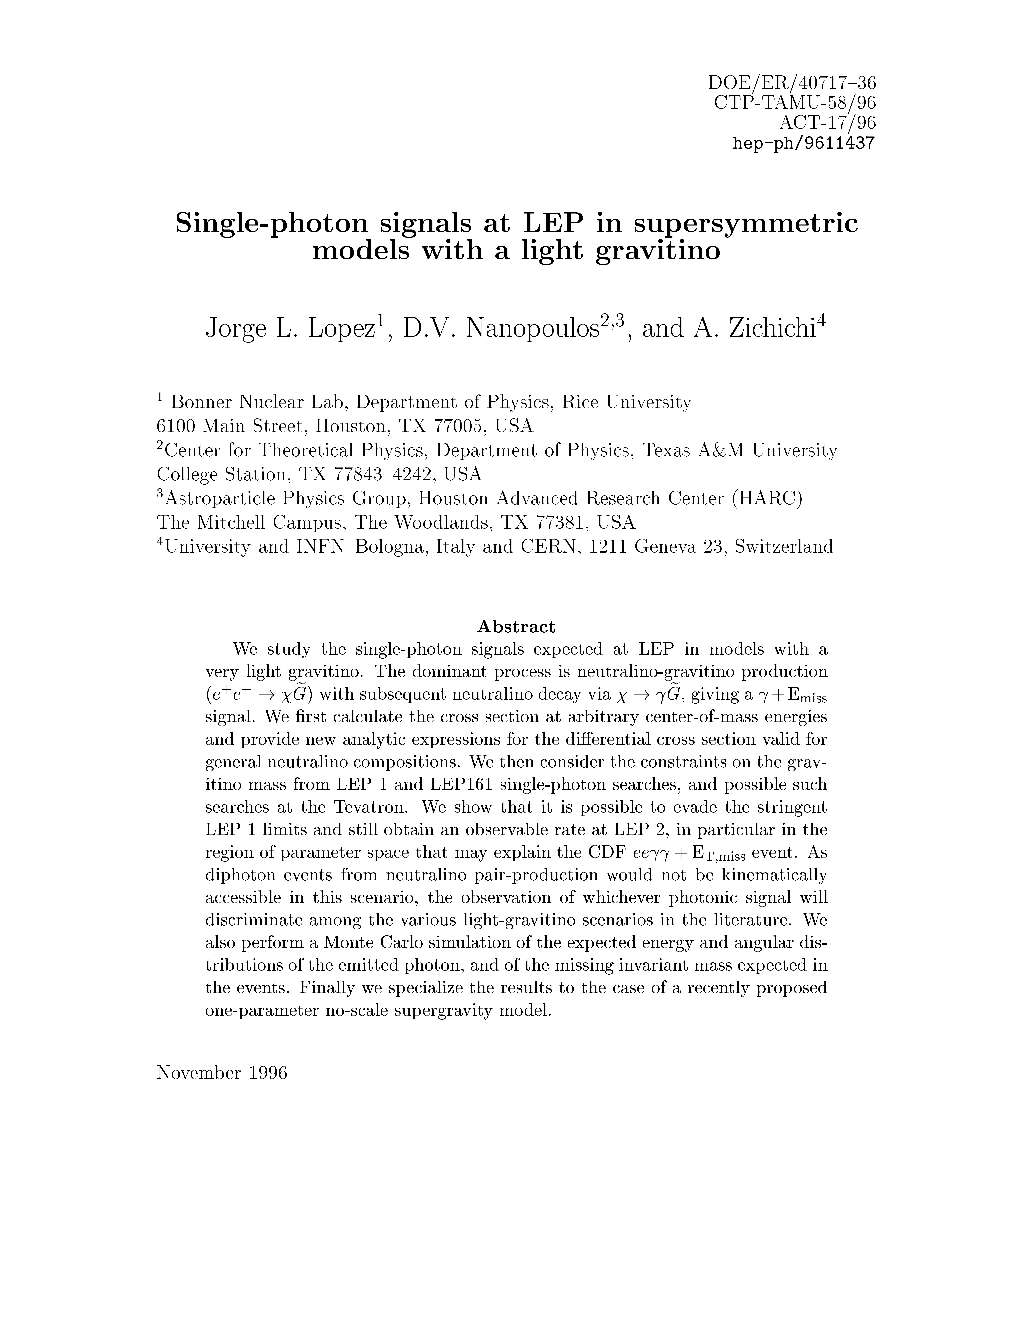 Single-Photon Signals at LEP in Supersymmetric Models with a Light